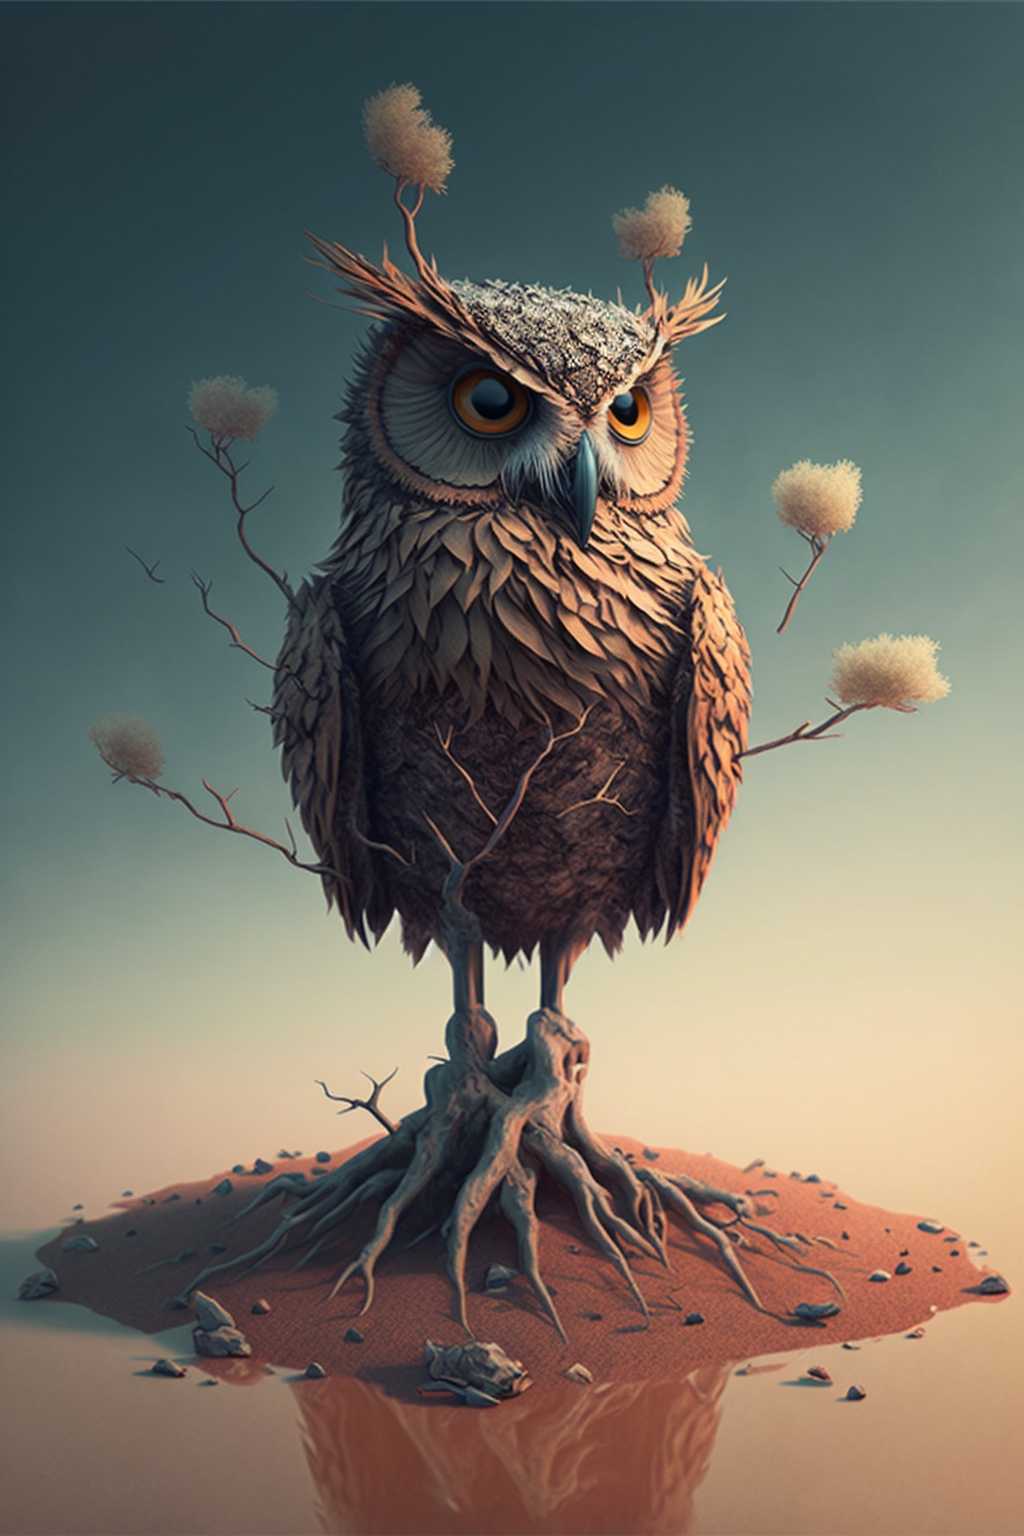 Owl in the style of Minimalist Surrealism 1